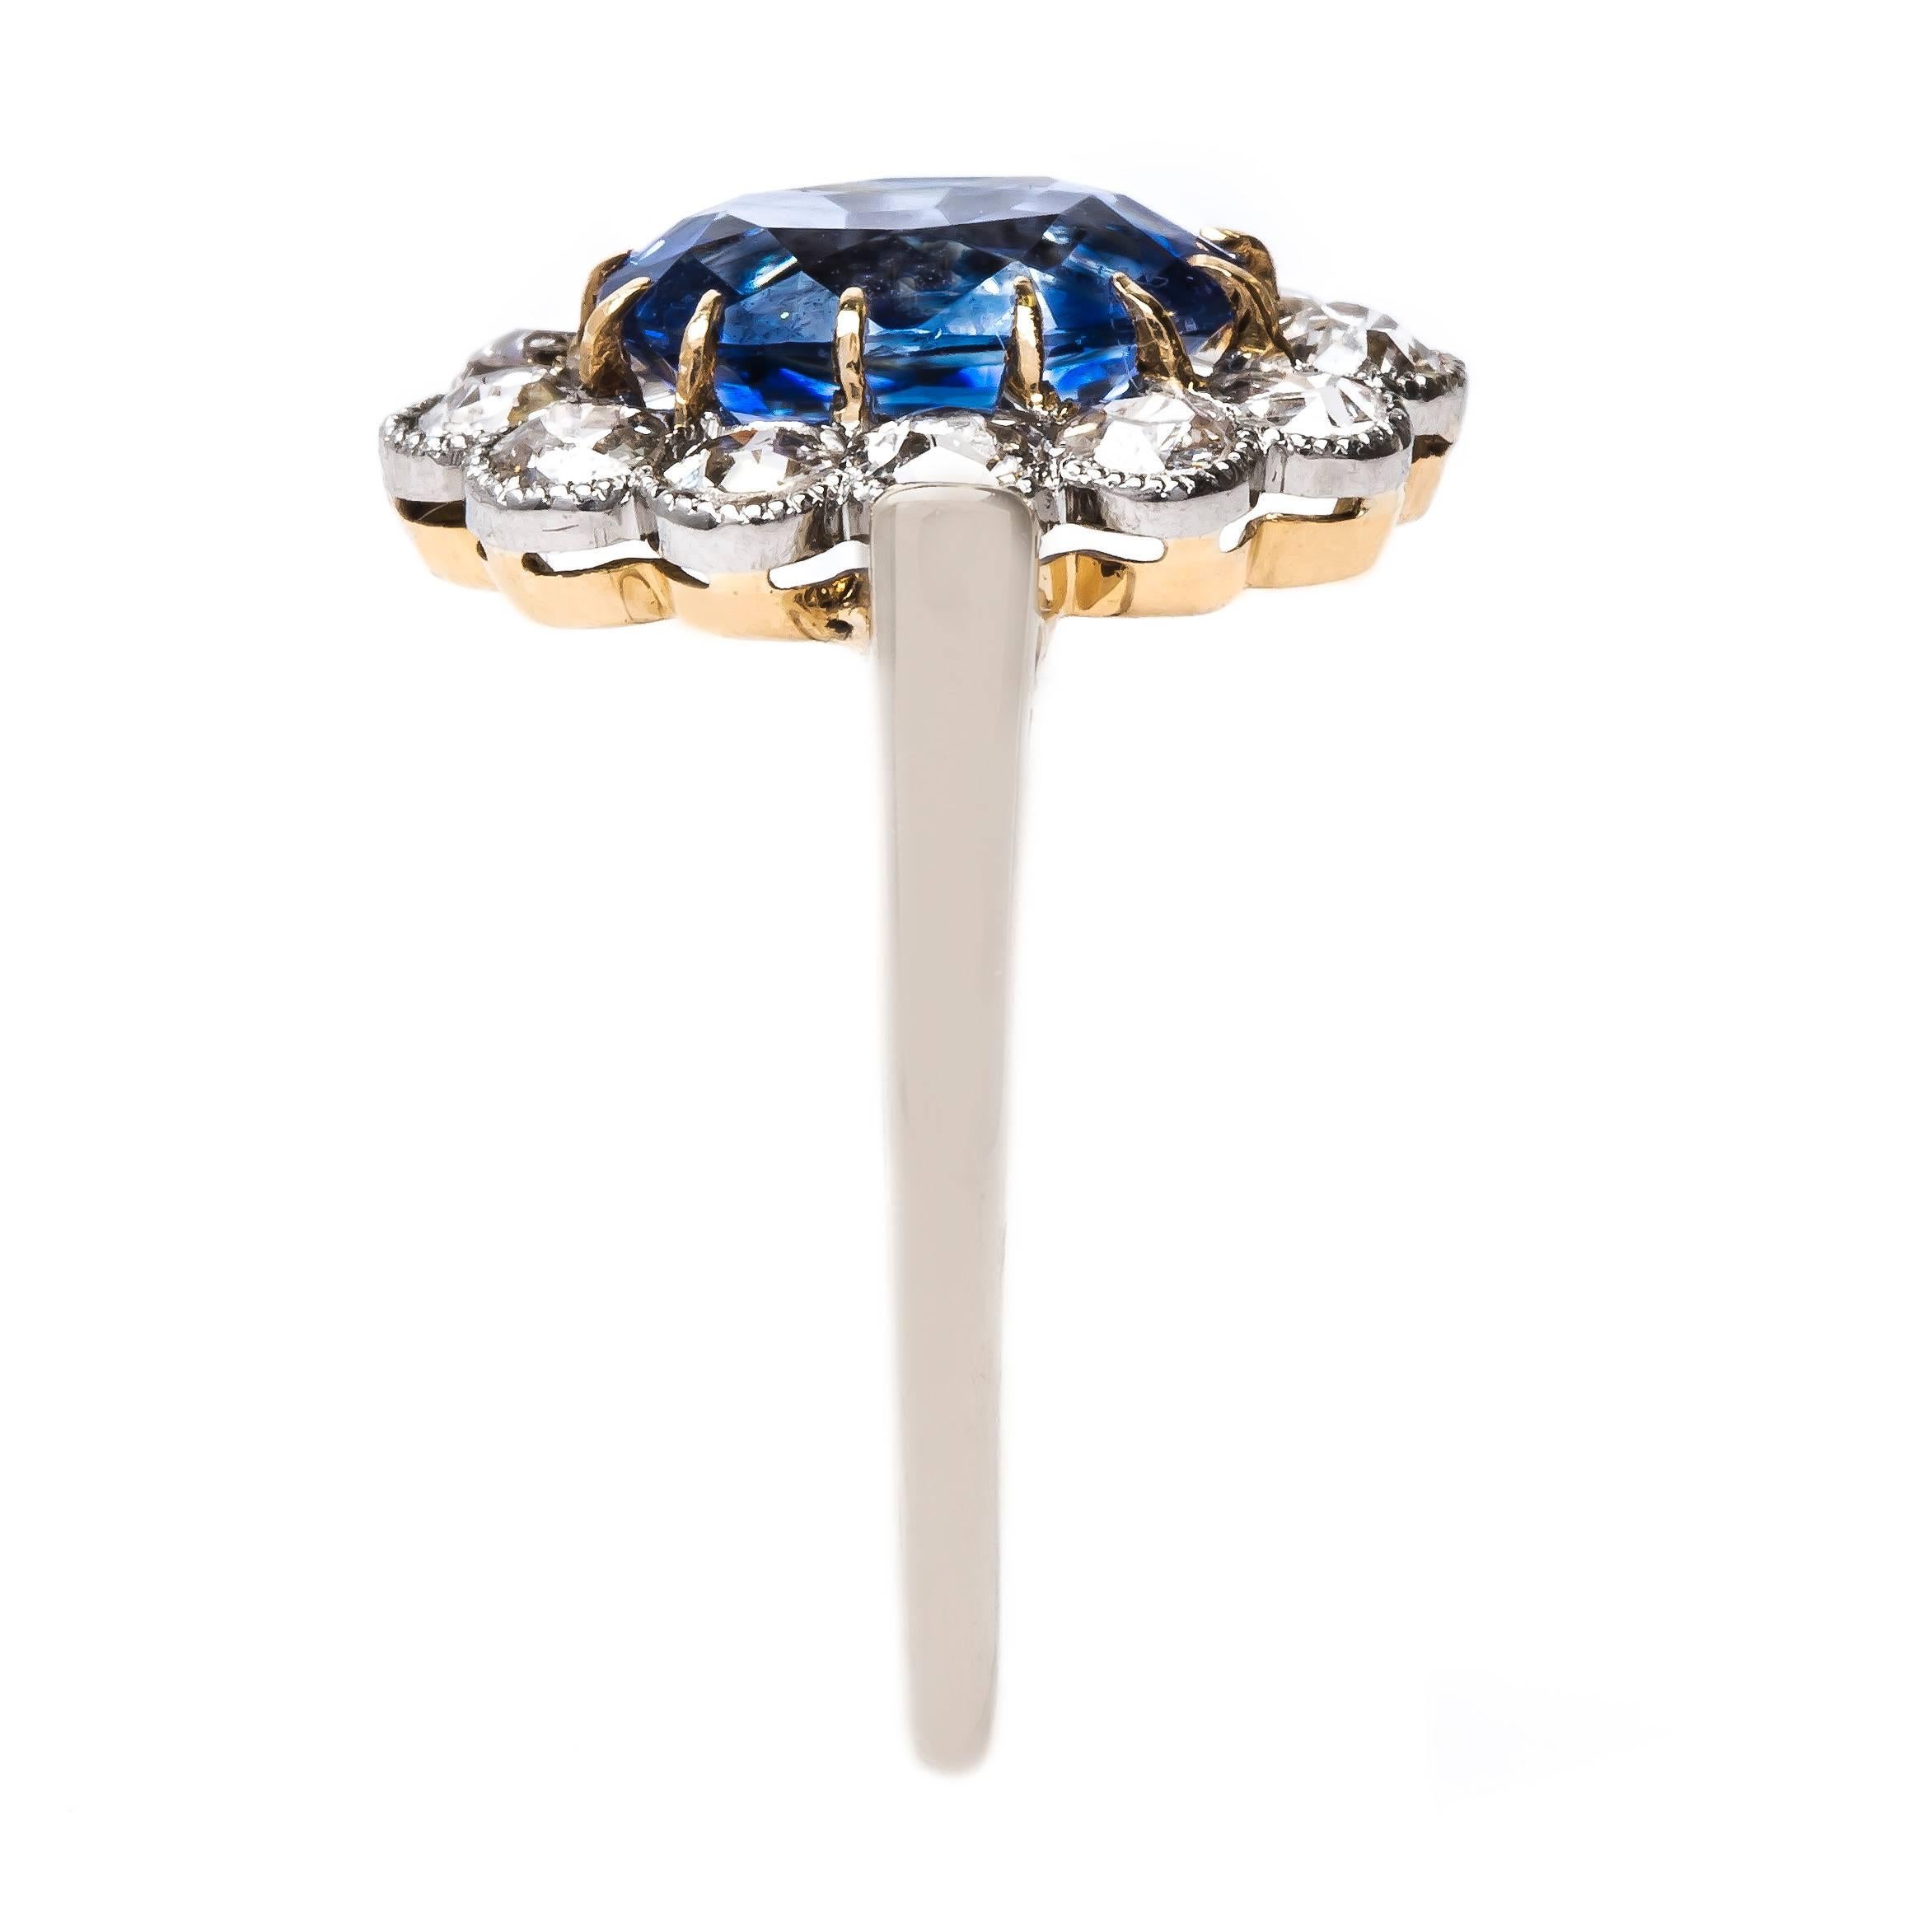 Women's Exceptional Victorian Engagement Ring with Unheated Sapphire and Diamond Halo